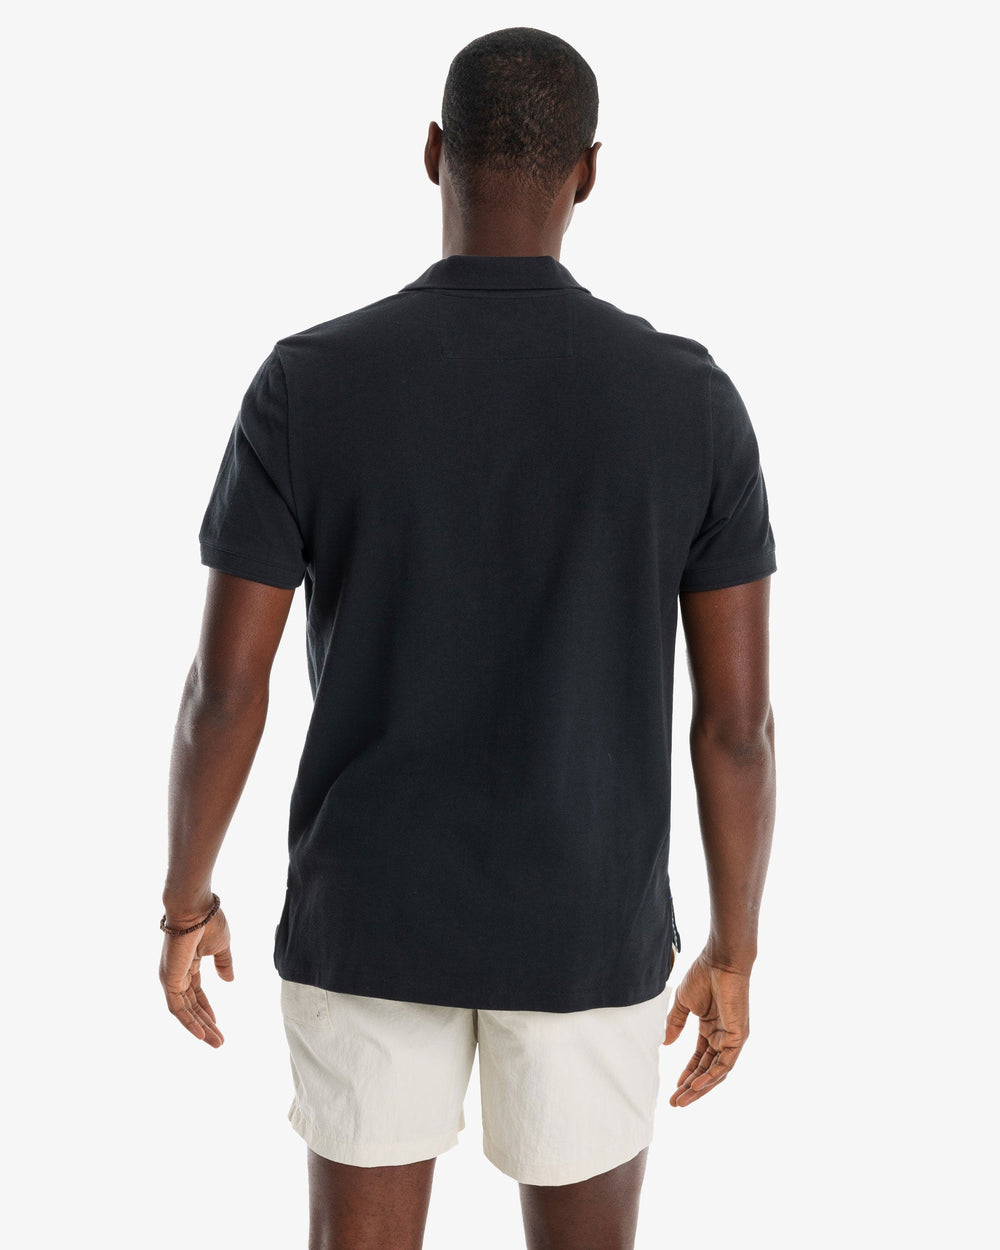 The model back view of the Men's New Skipjack Polo Shirt by Southern Tide - Midnight Black